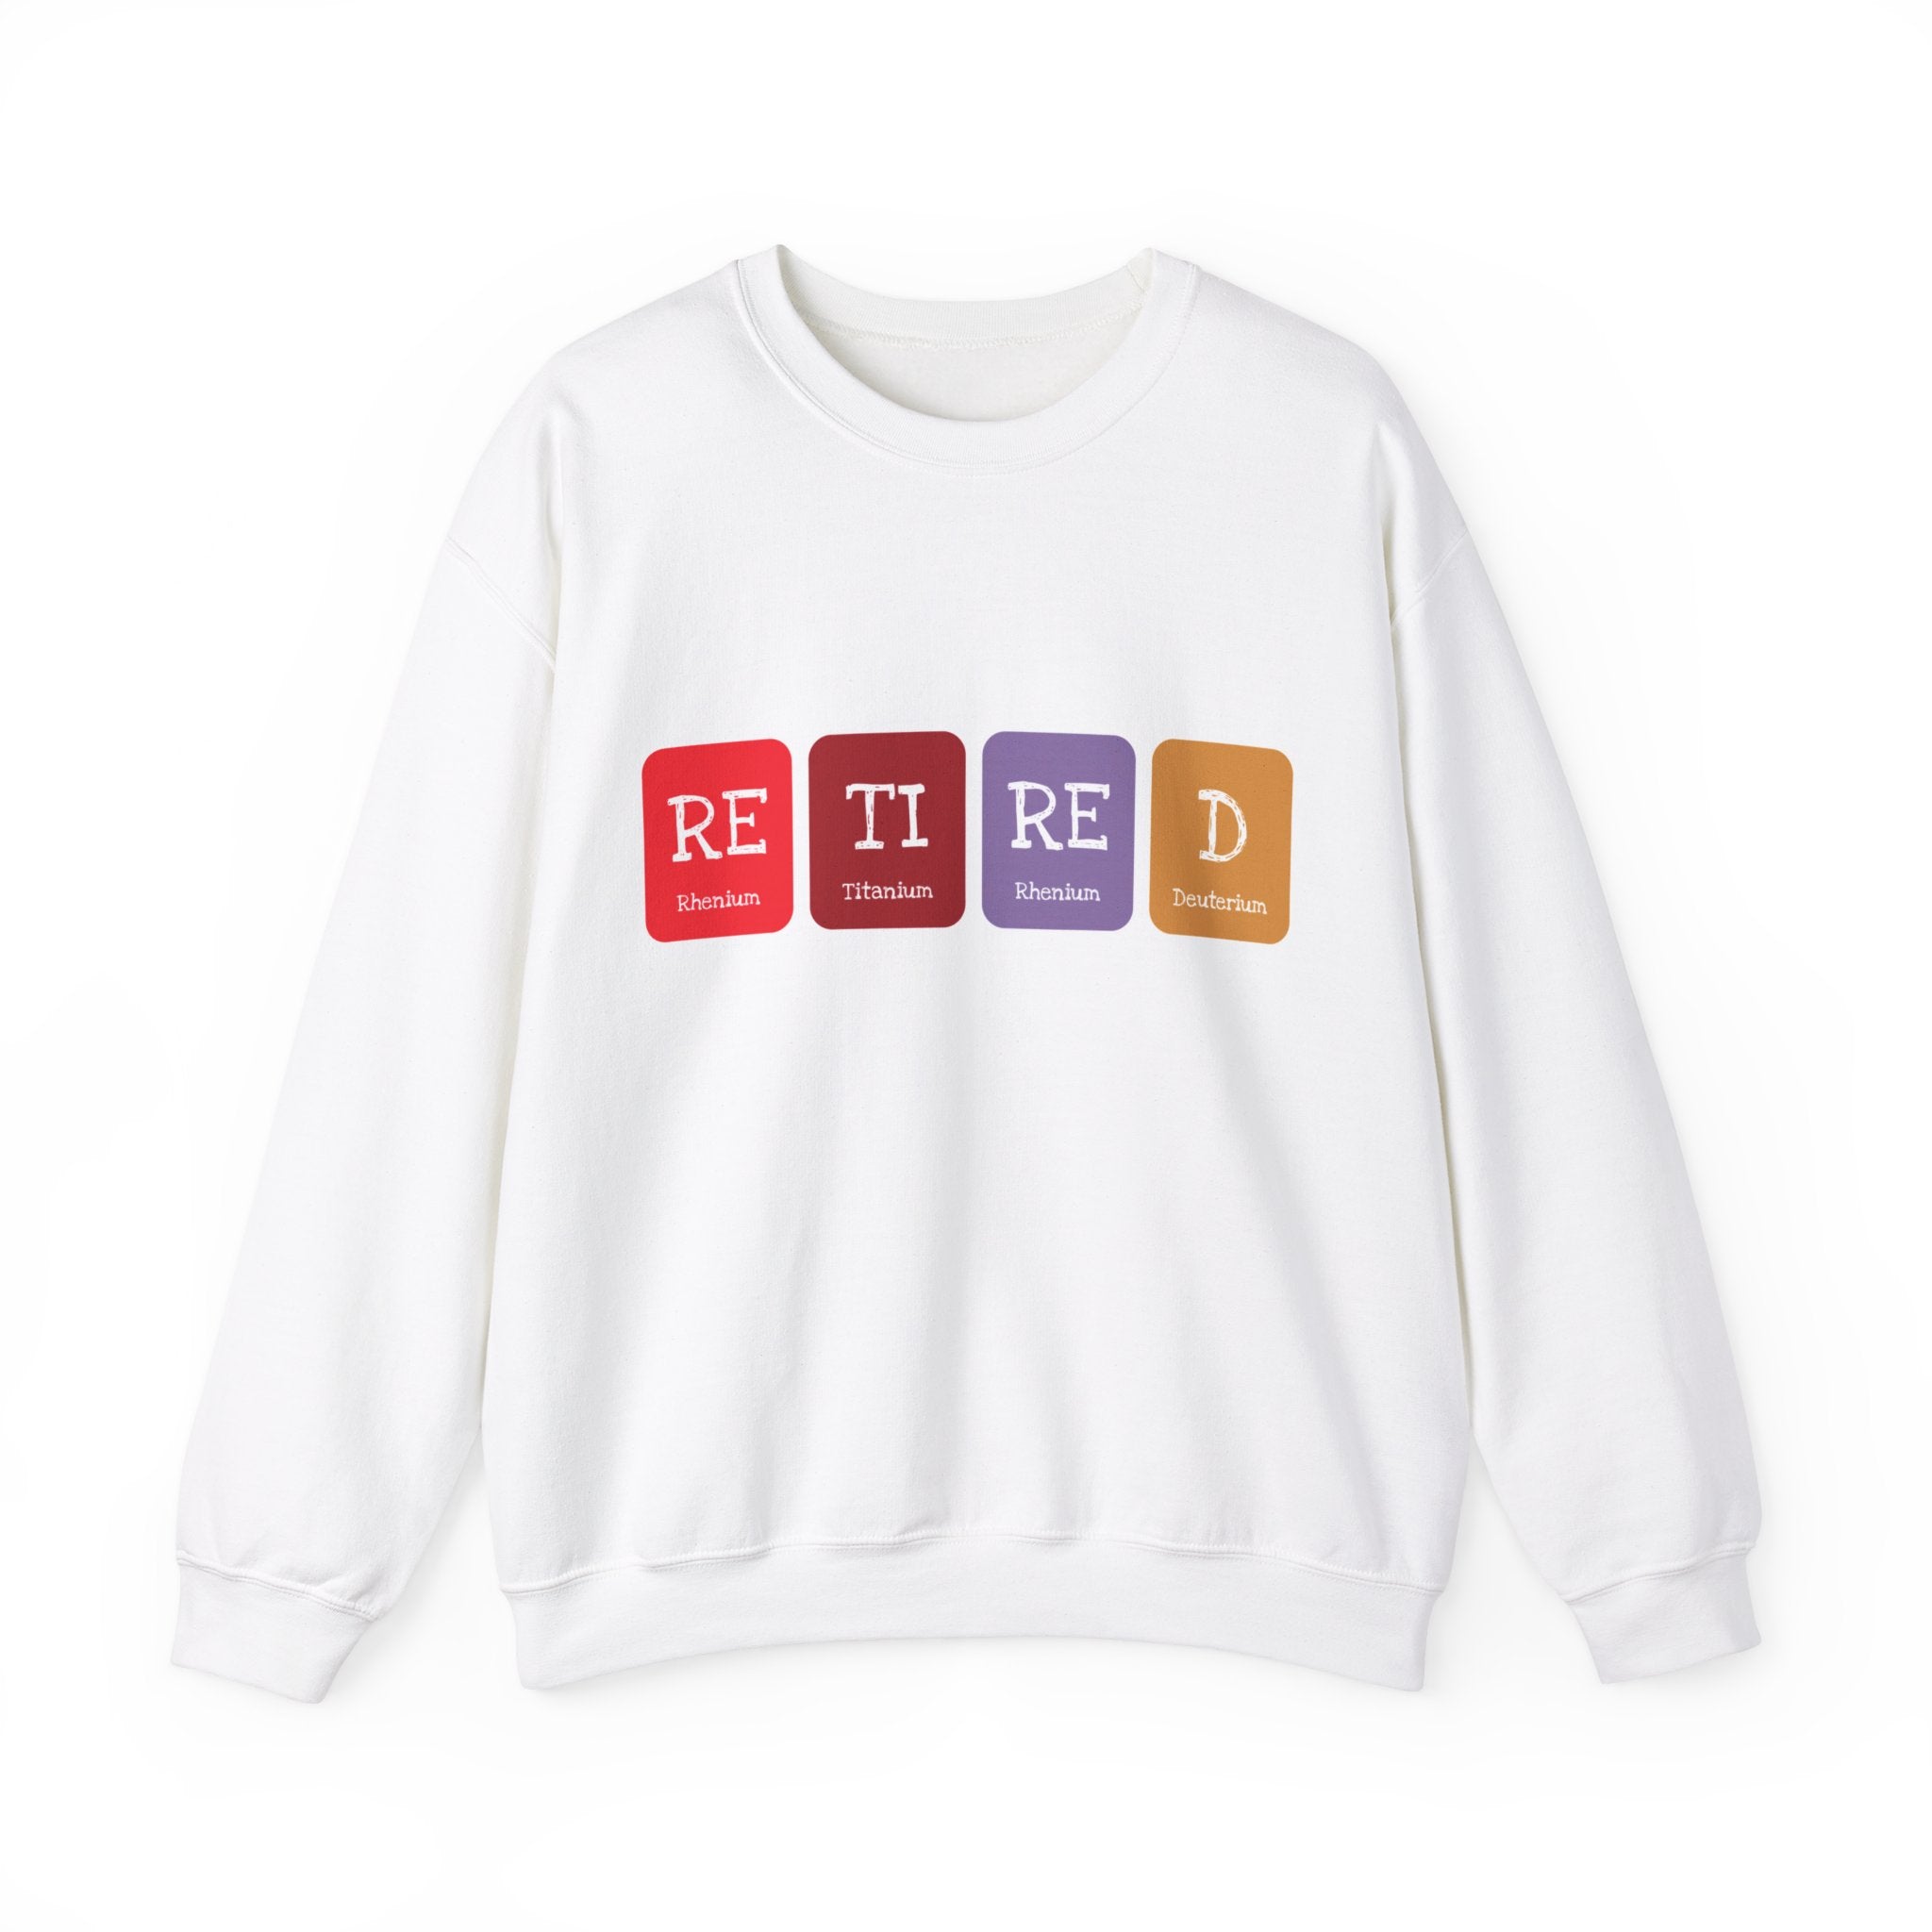 Retired - Sweatshirt: White sweatshirt with colorful blocks spelling "RETIRED" on the front, using periodic table elements: Rhenium (Re), Titanium (Ti), Rhenium (Re), and Dubnium (Db). Experience ultimate comfort while showcasing your love for science and celebrating retirement.